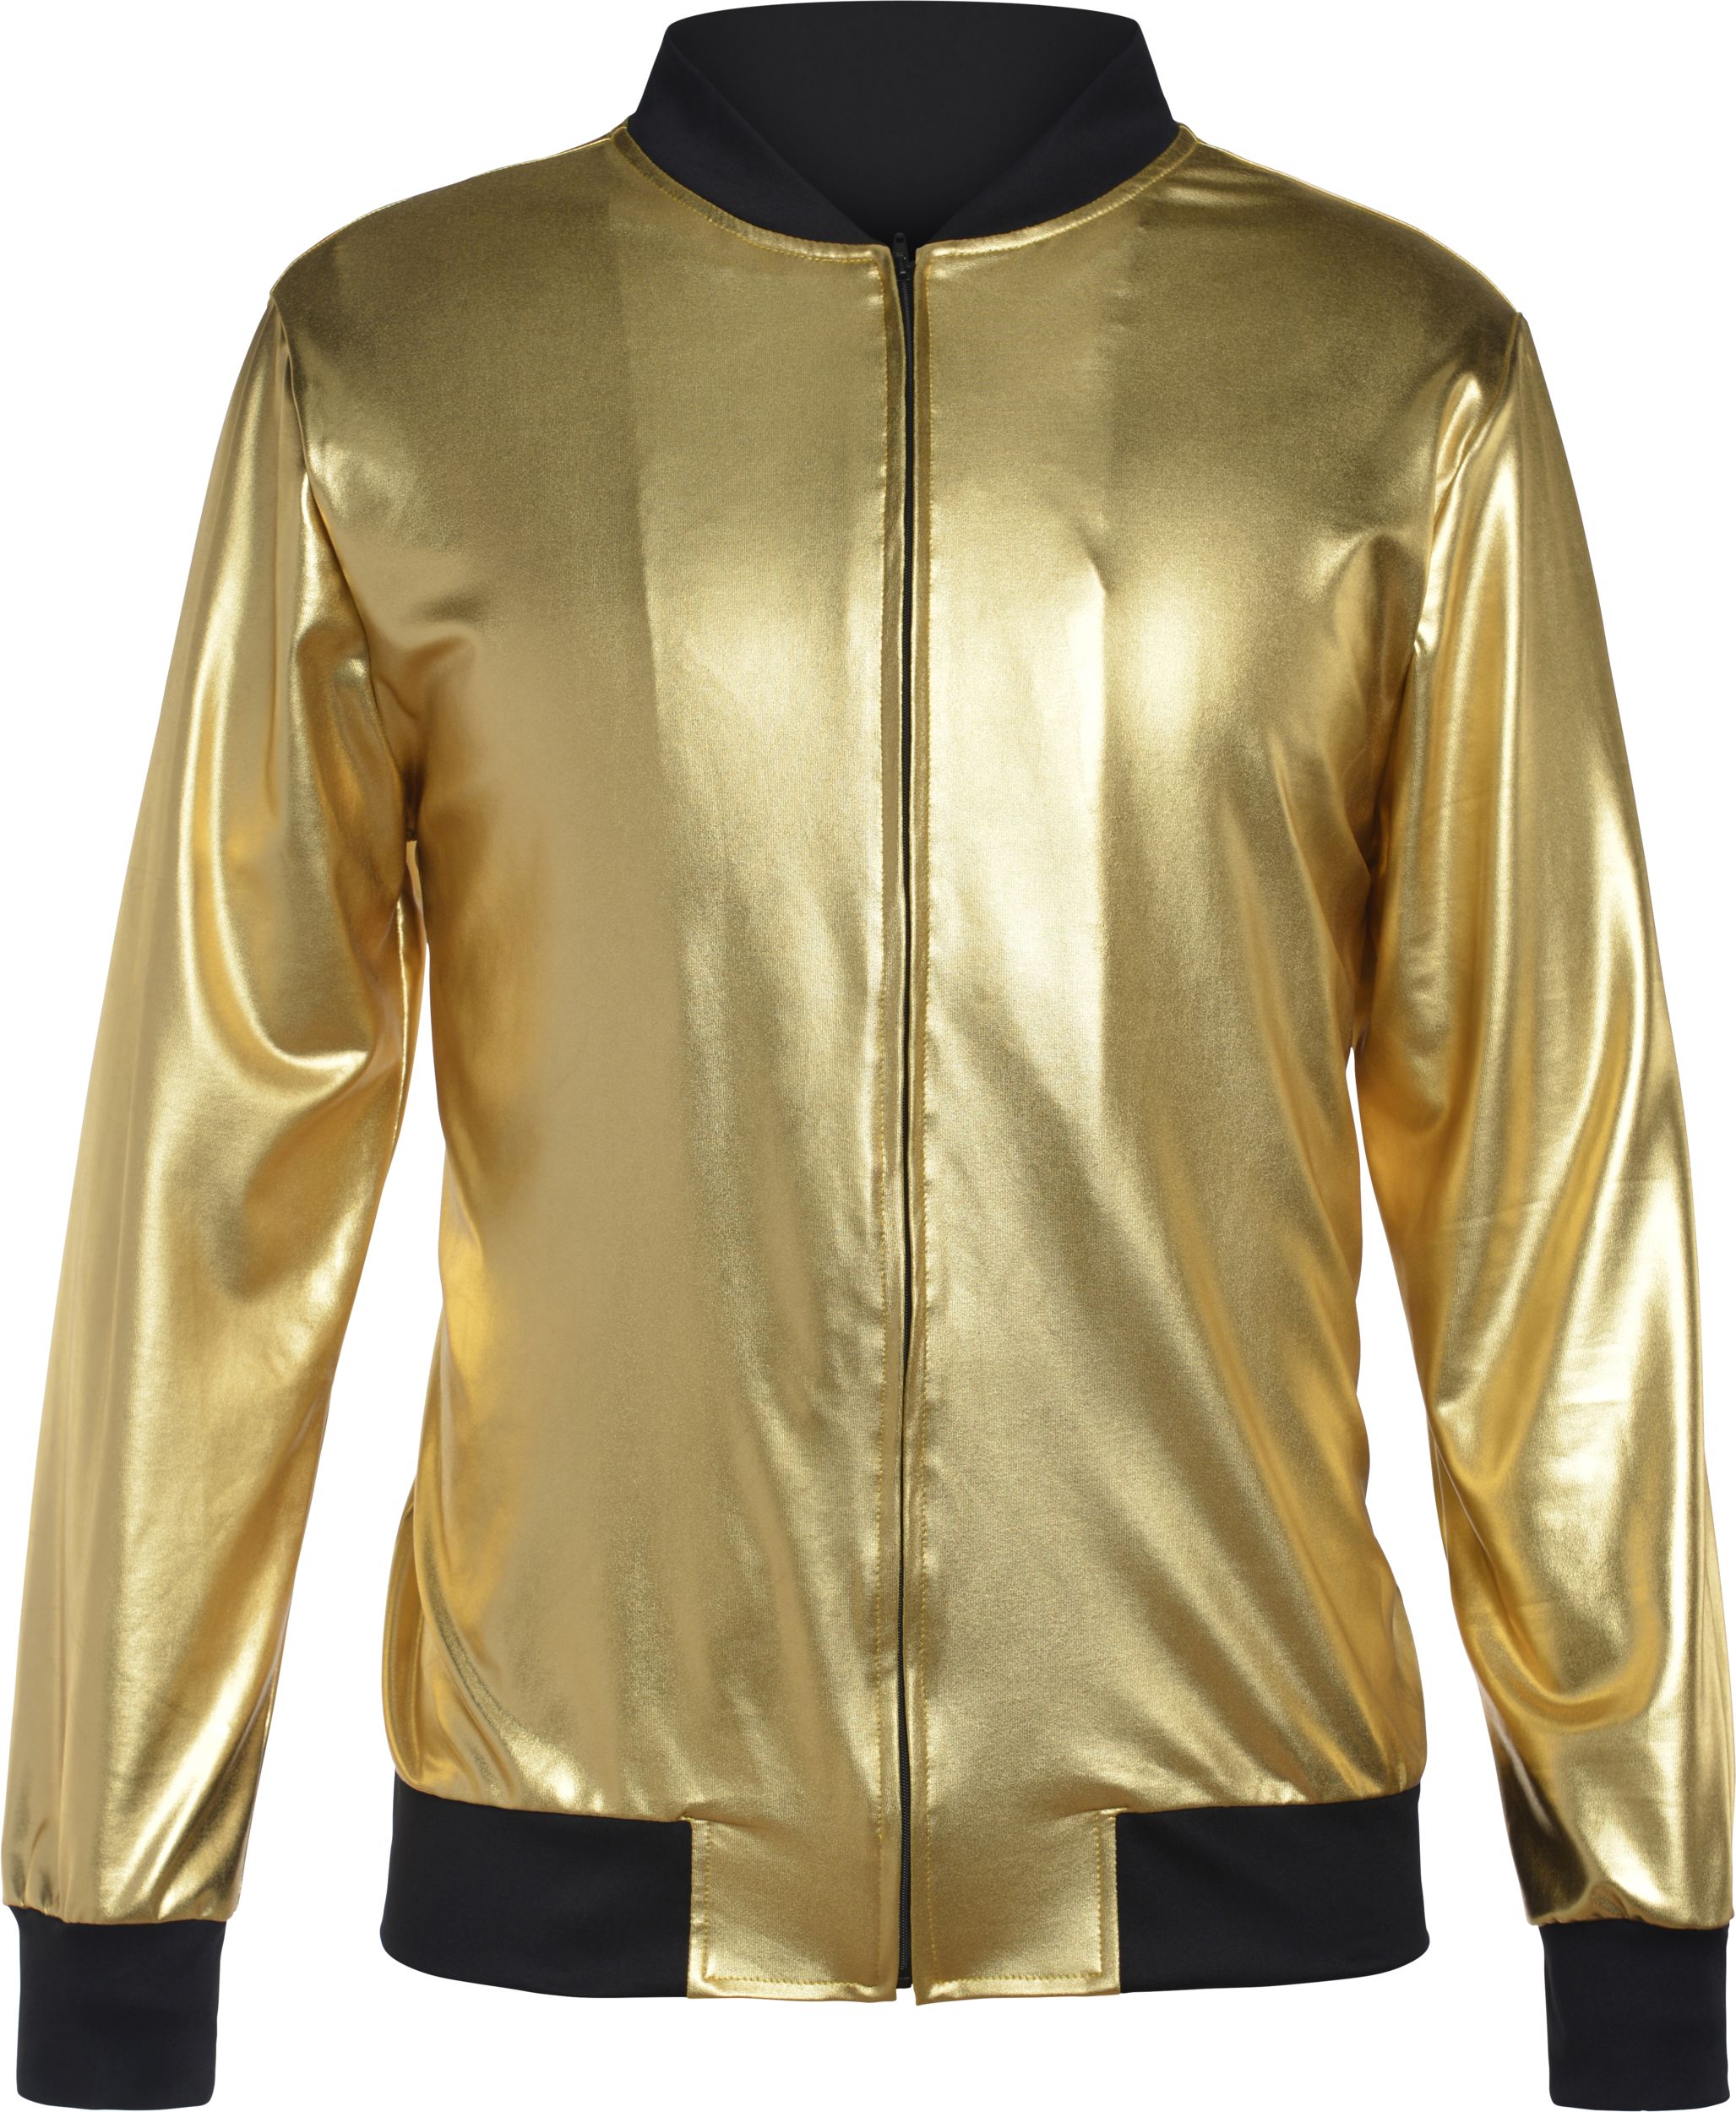 Adult Hip Hop Track Jacket, Gold, One Size, Wearable Costume